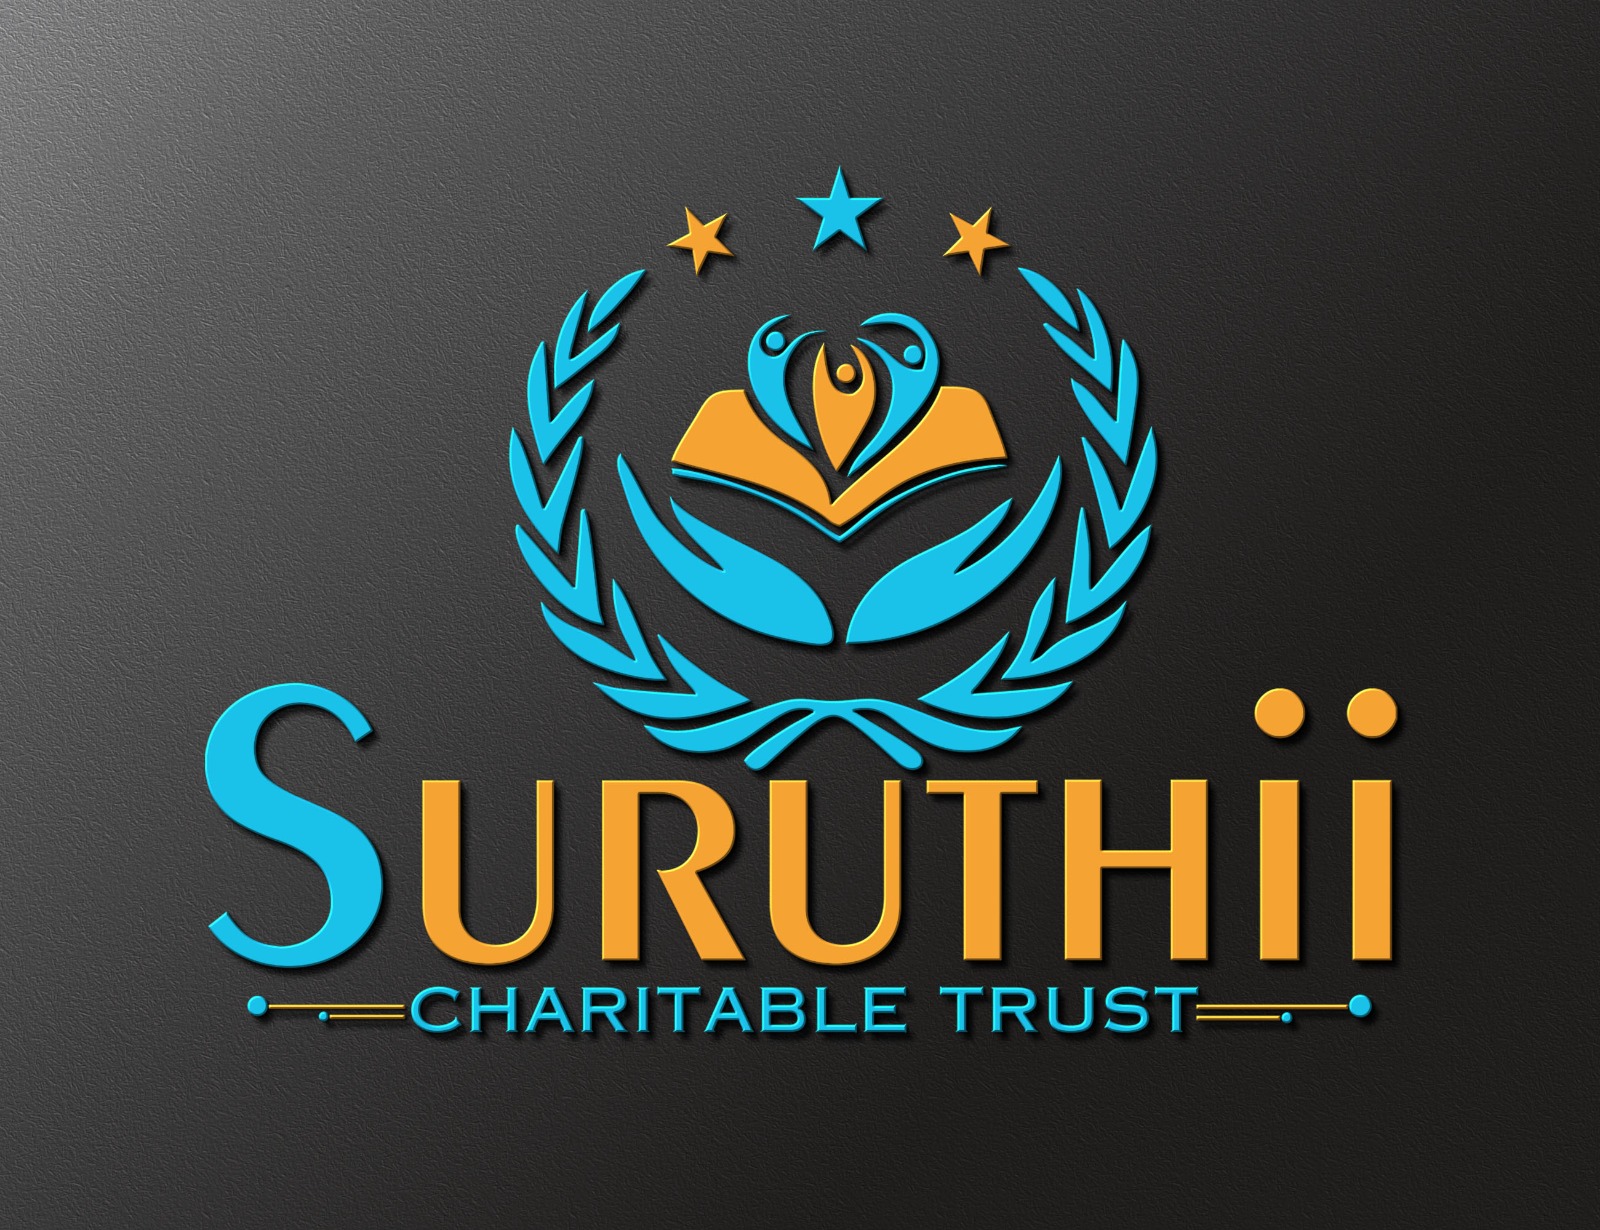 Nice Foundation Charitable Trust in Yousufguda,Hyderabad - Best Orphanages  in Hyderabad - Justdial